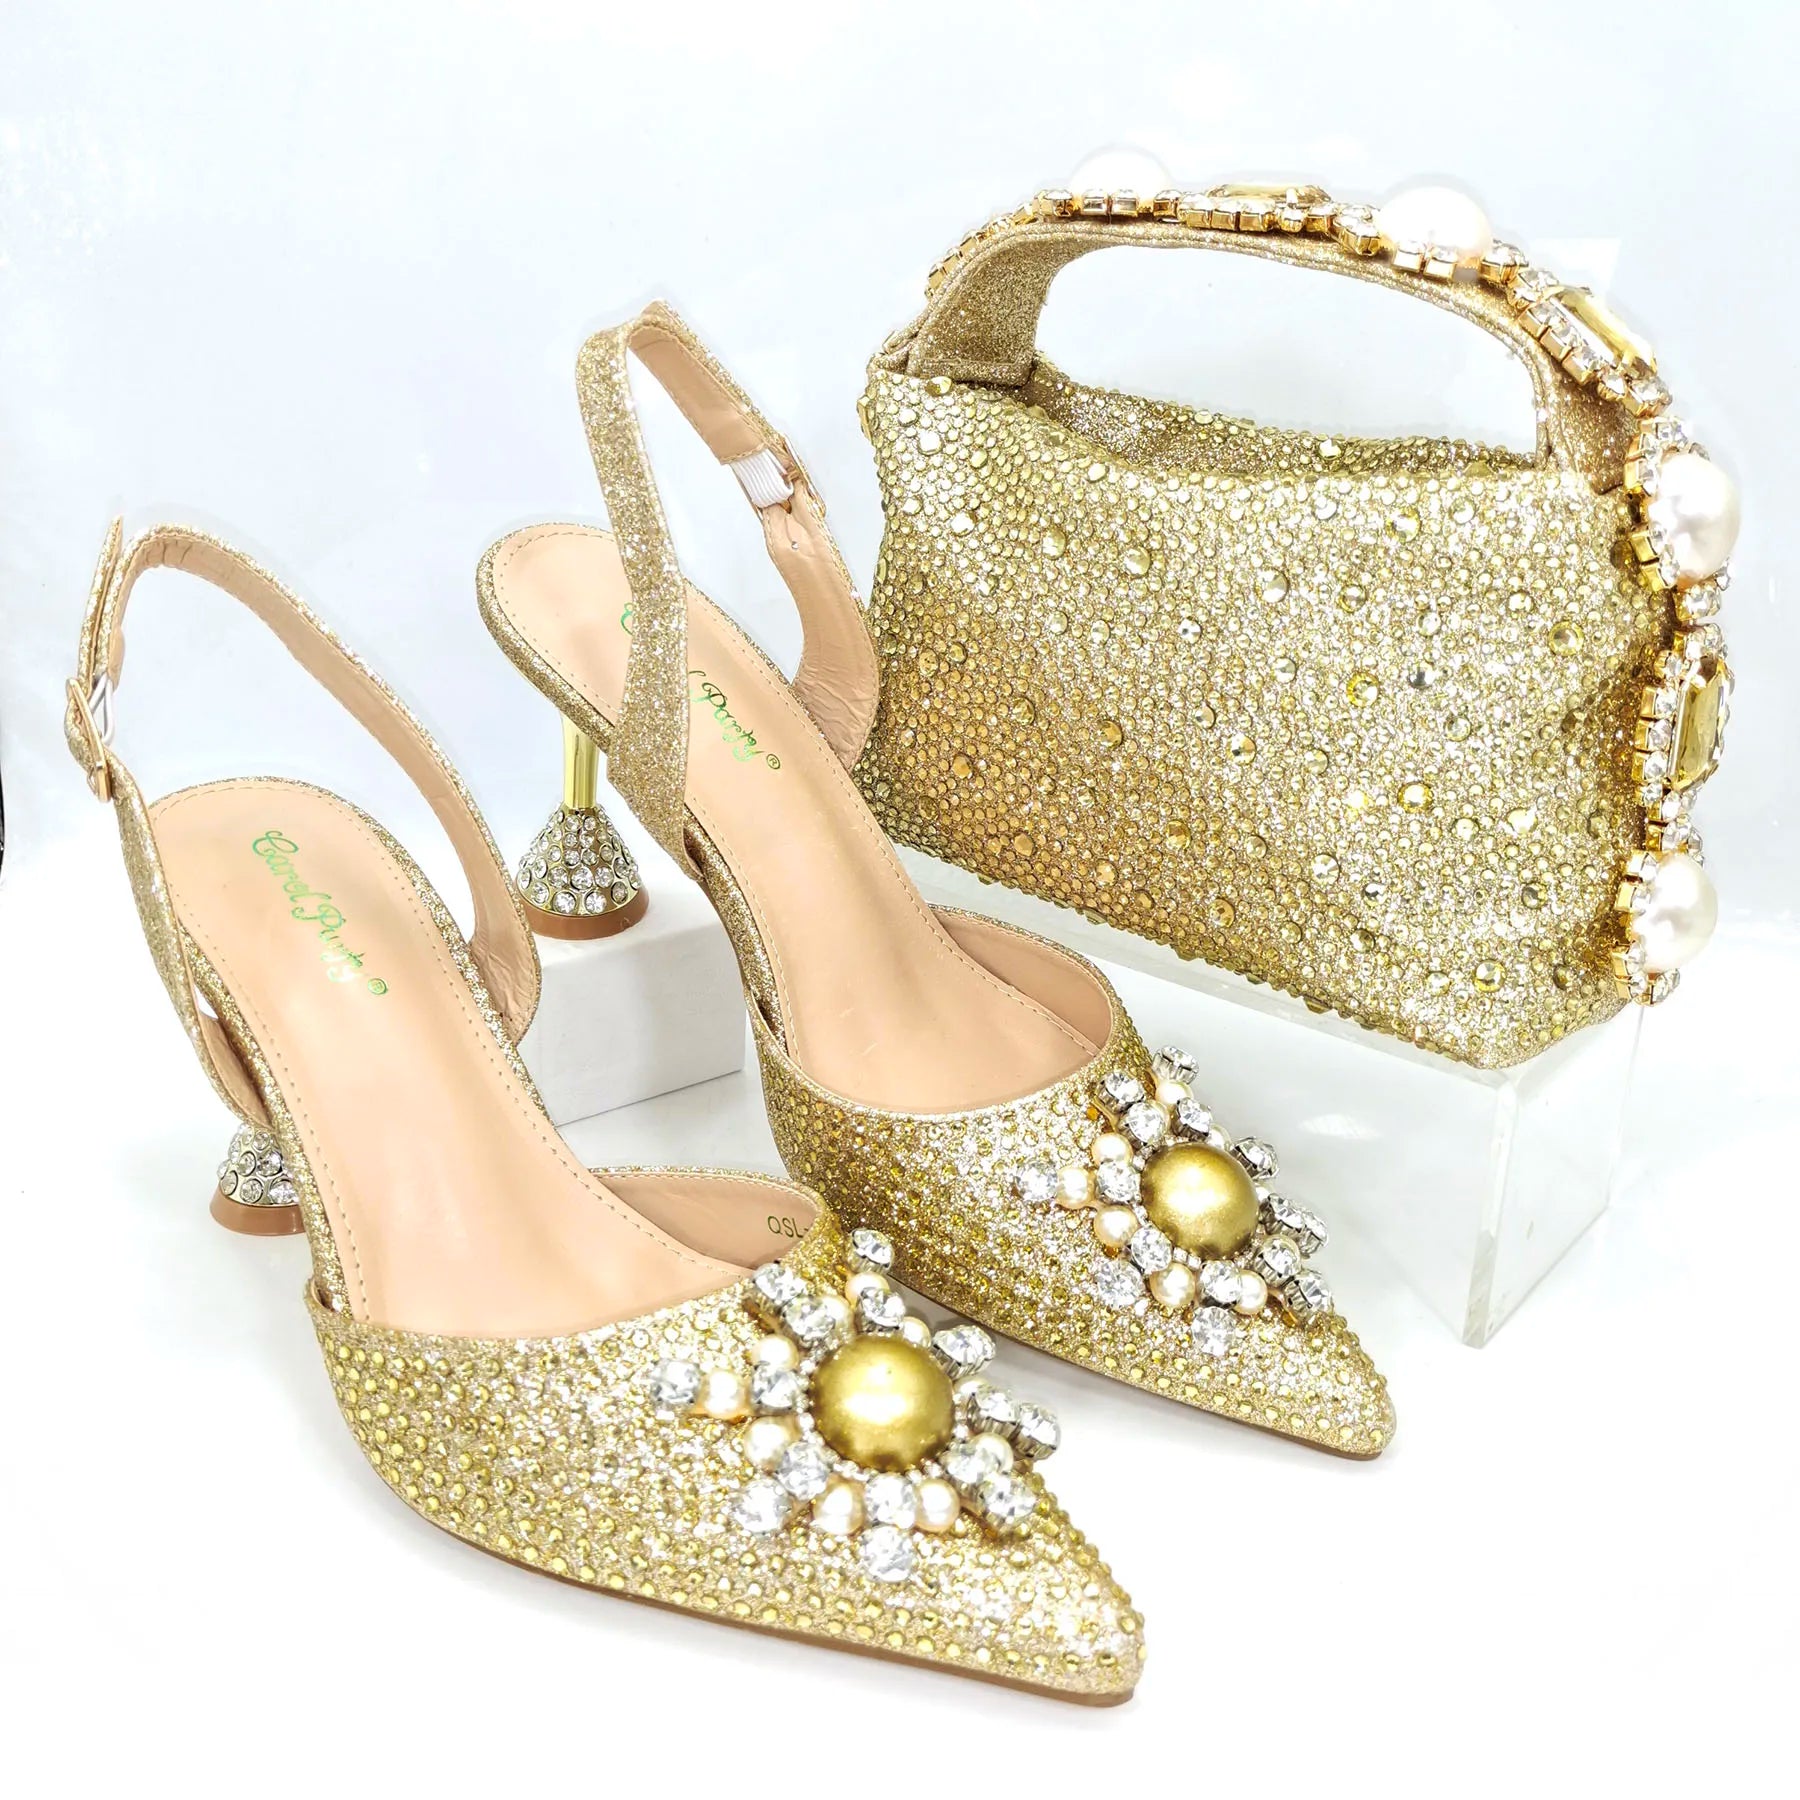 Gold Color Elegant Lady Shoes And Bag Set with Rhinestone Embellished Pearls-knot Wear-resistant And Comfortable Heel - Basso & Brooke